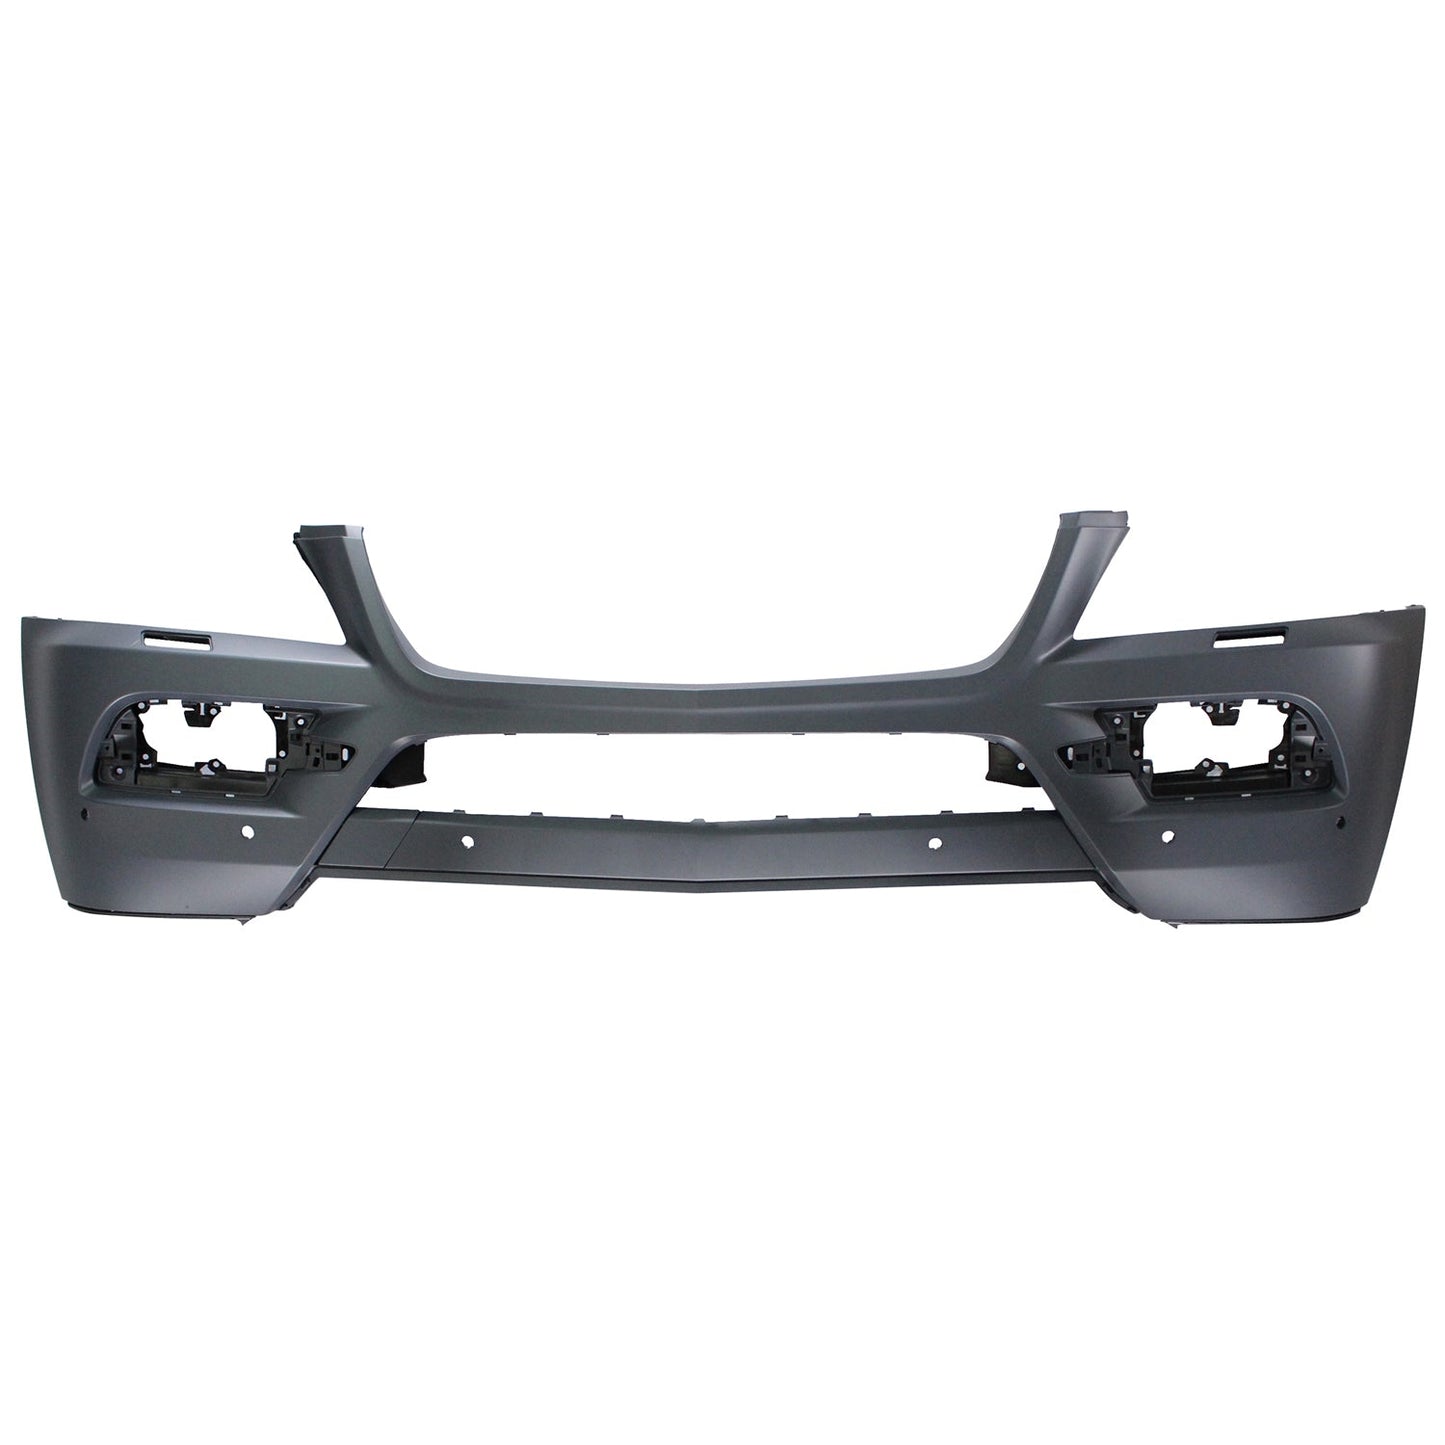 1000 | 2010-2012 MERCEDES-BENZ GL450 Front bumper cover X164; w/Parktronic; w/Active Lighting; prime | MB1000489|16488504389999